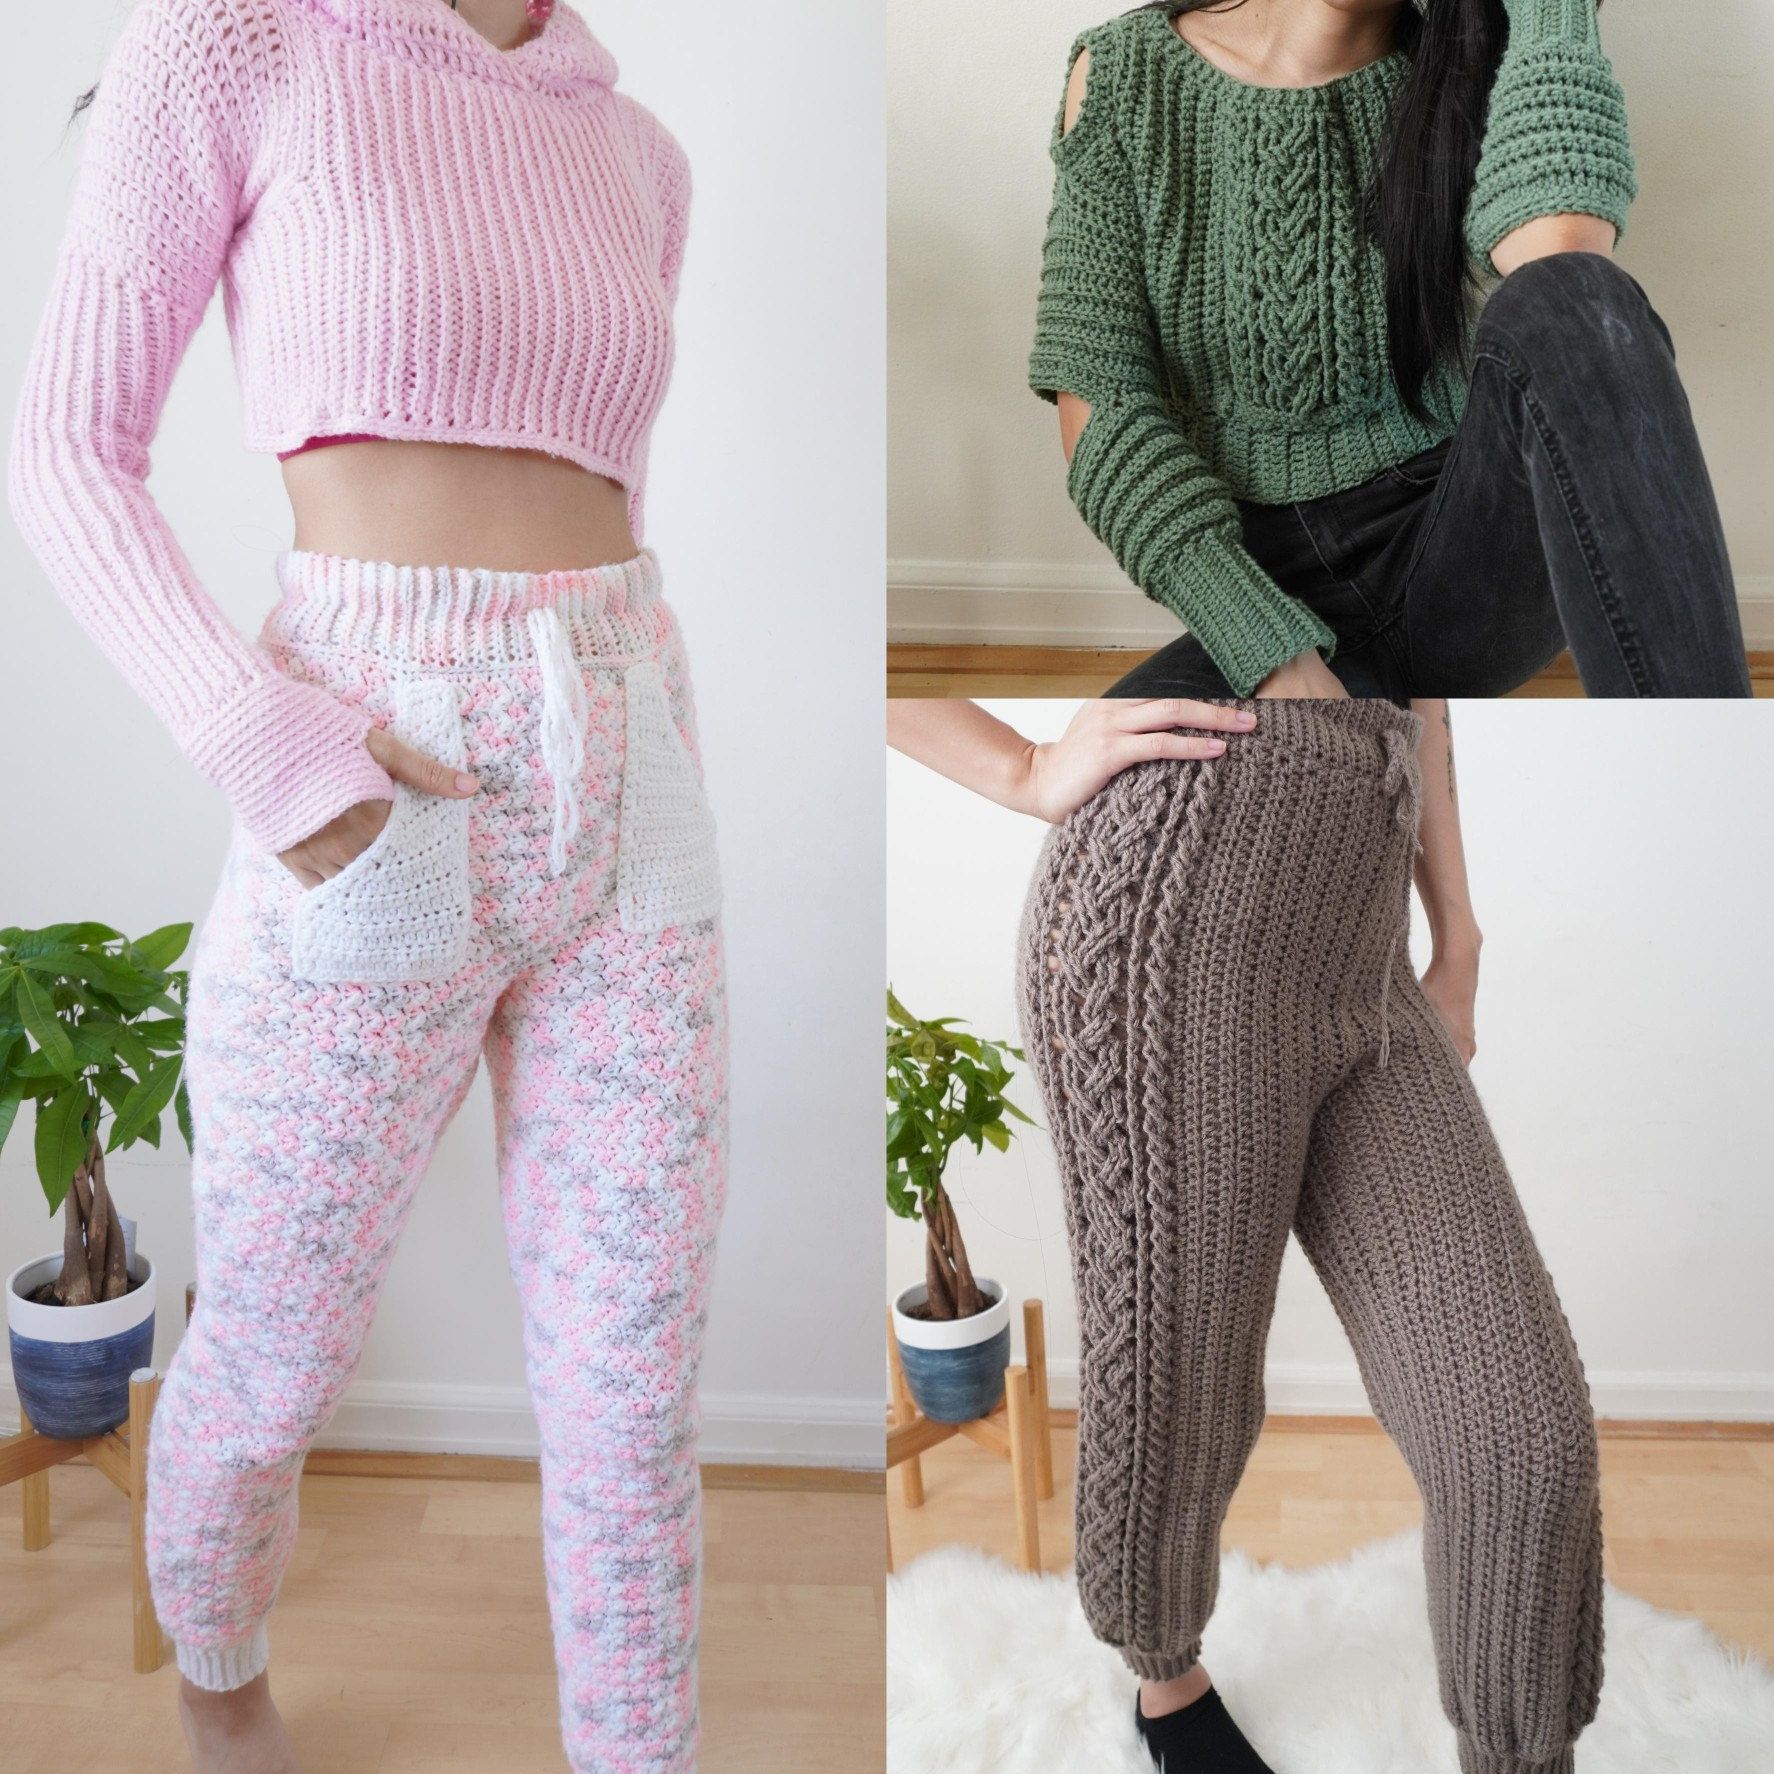 Crochet Cropped Hoodie and High Waisted Sweats Pattern Bundle -   17 diy Clothes sweater ideas